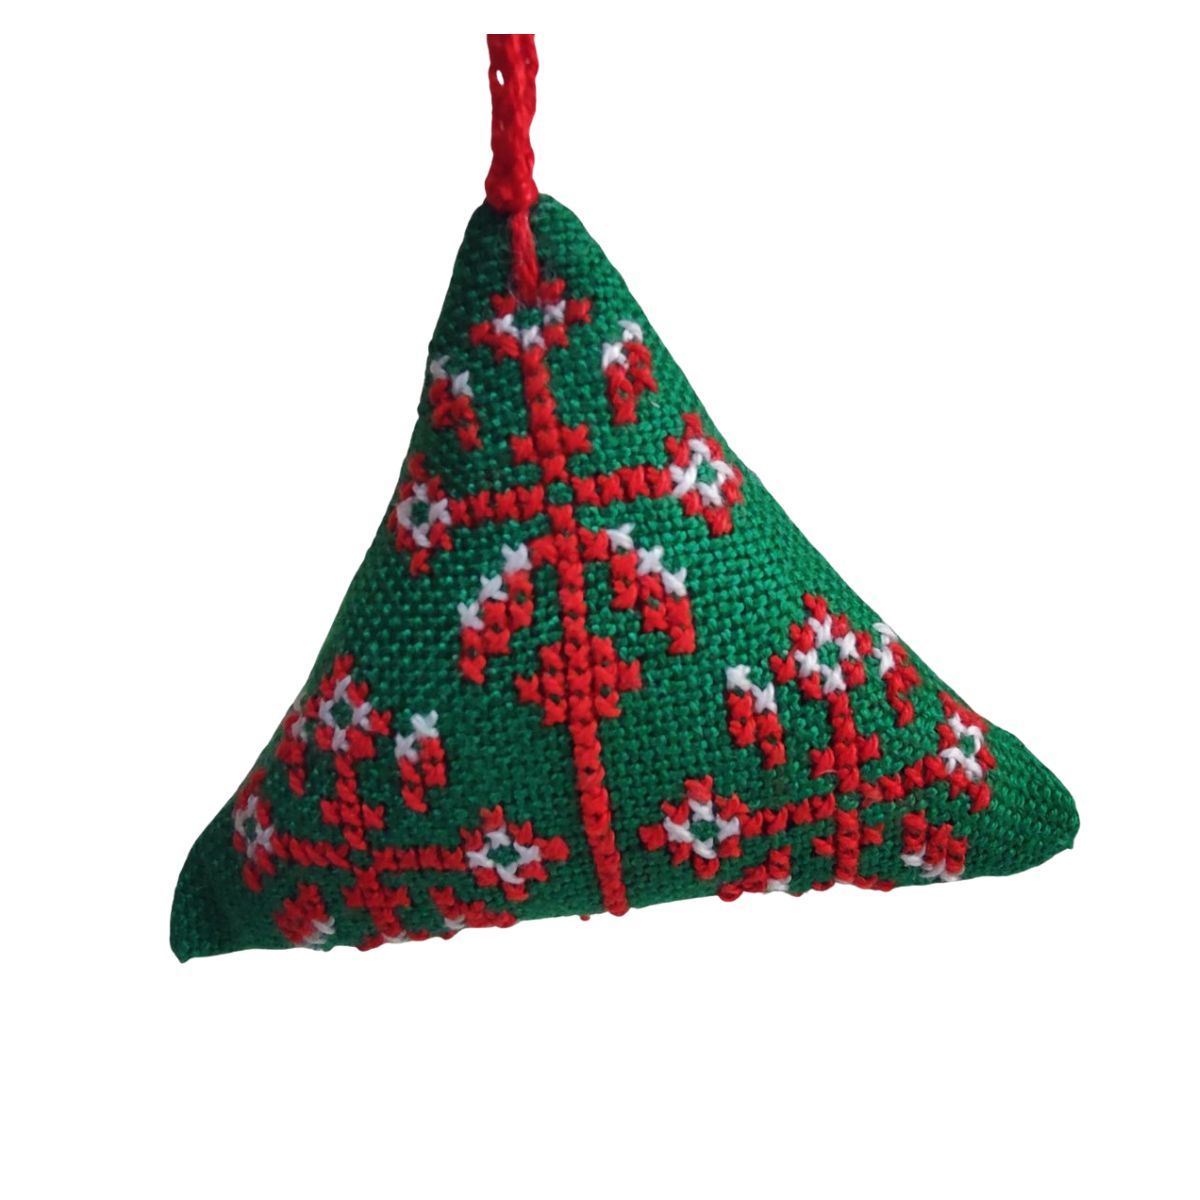 Embroidered Ornament from Gaza